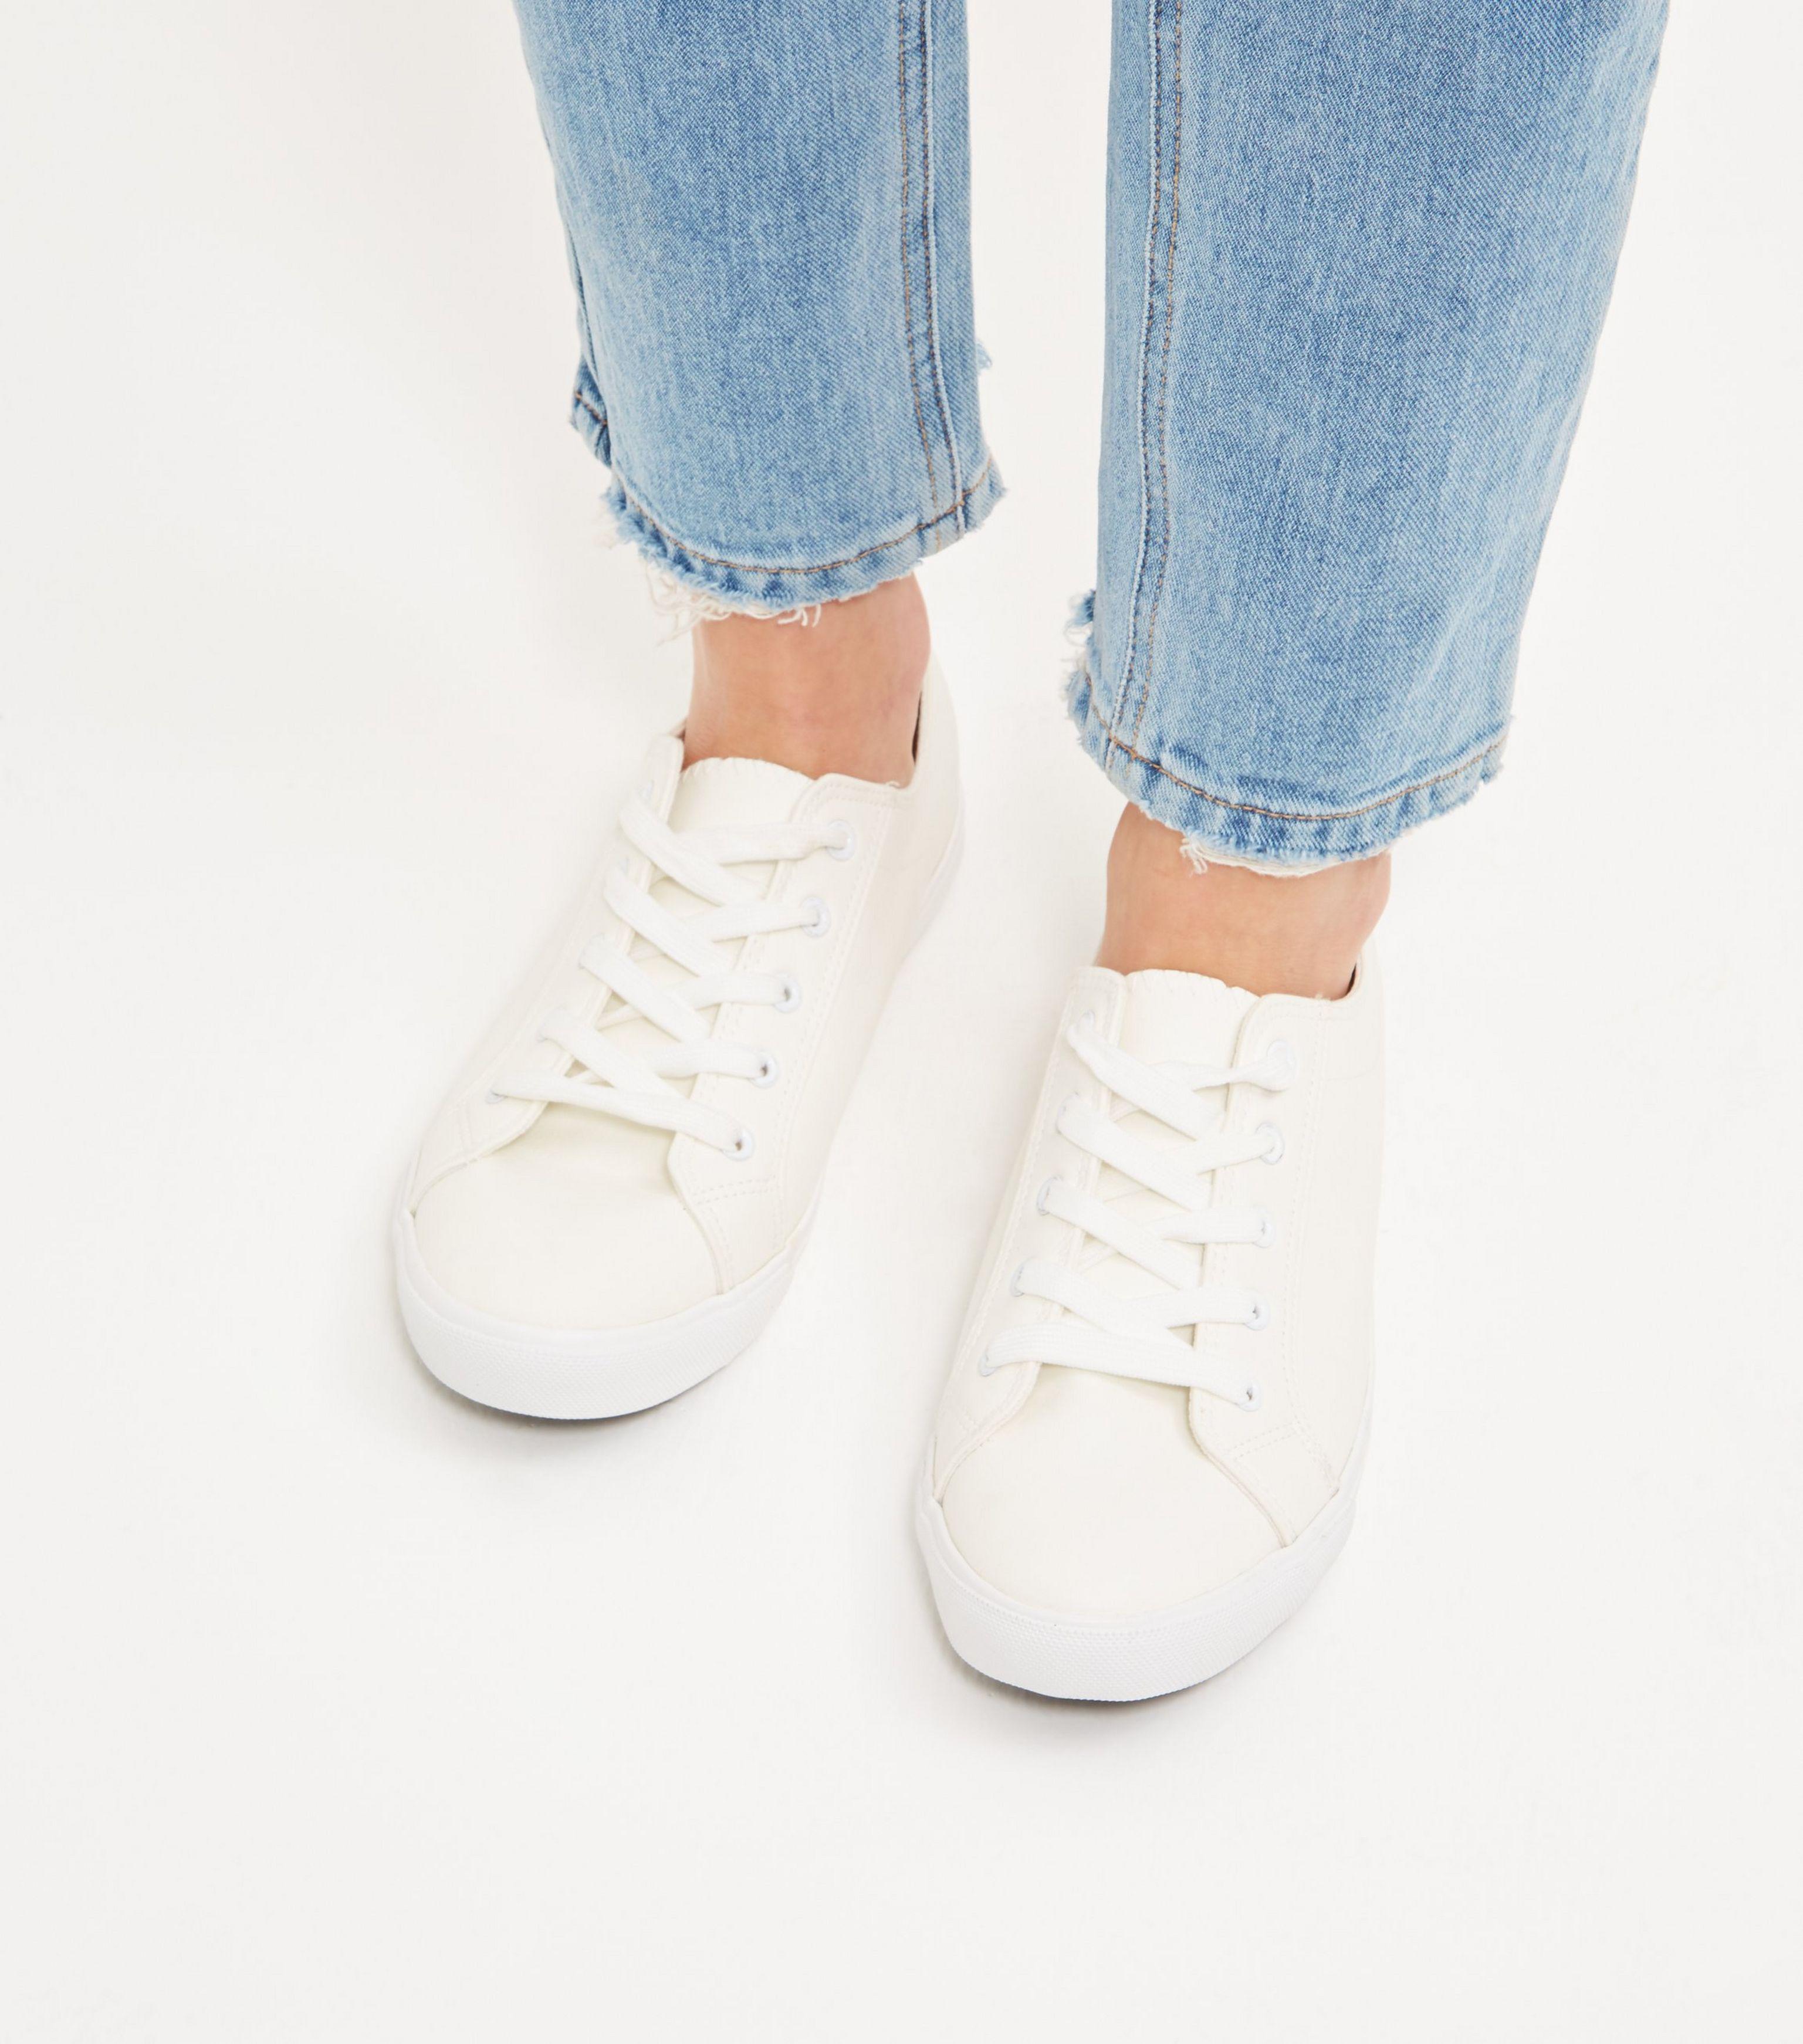 Wide Fit Cream Lace Up Plimsolls - Lyst